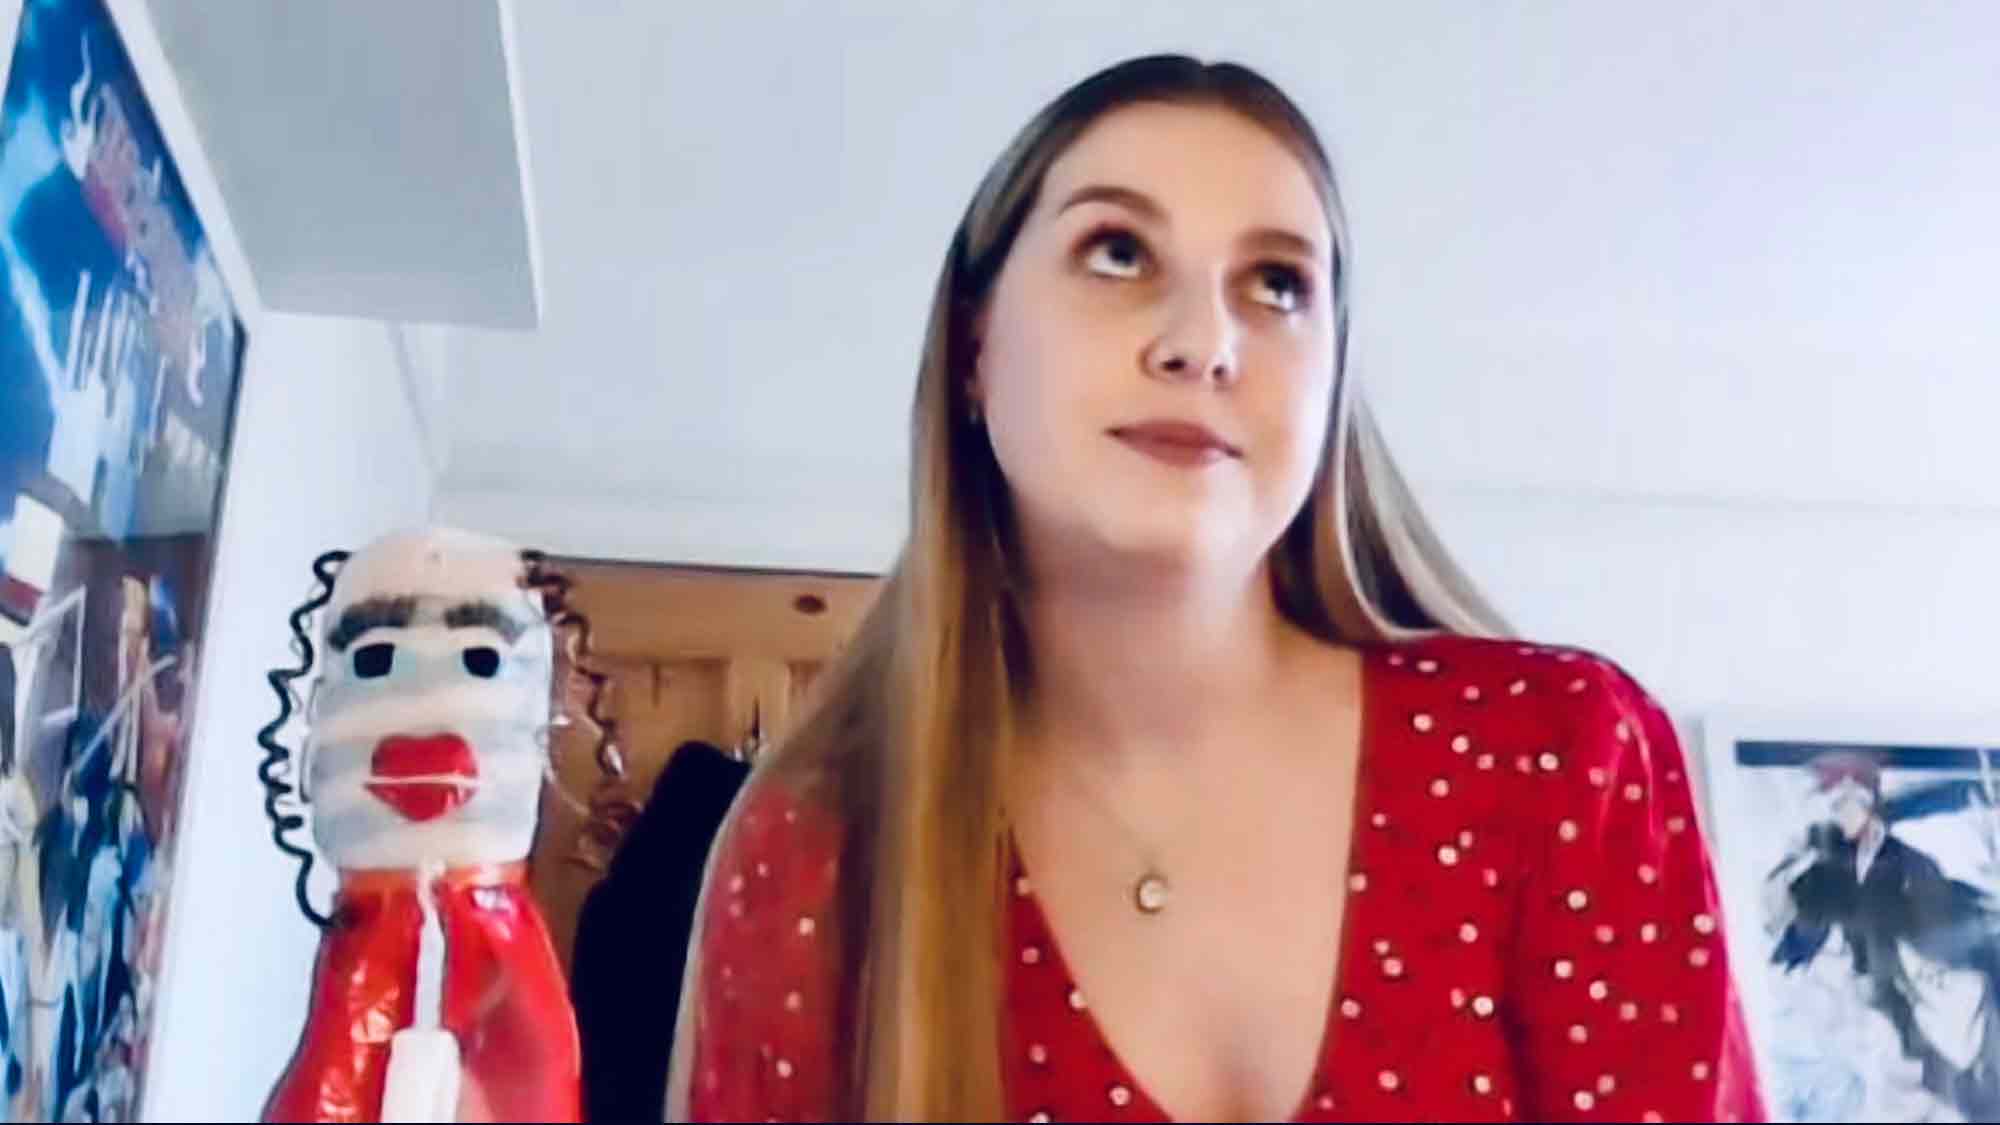 Megan Greenhill and Mandy the Menstrual Waste Puppet